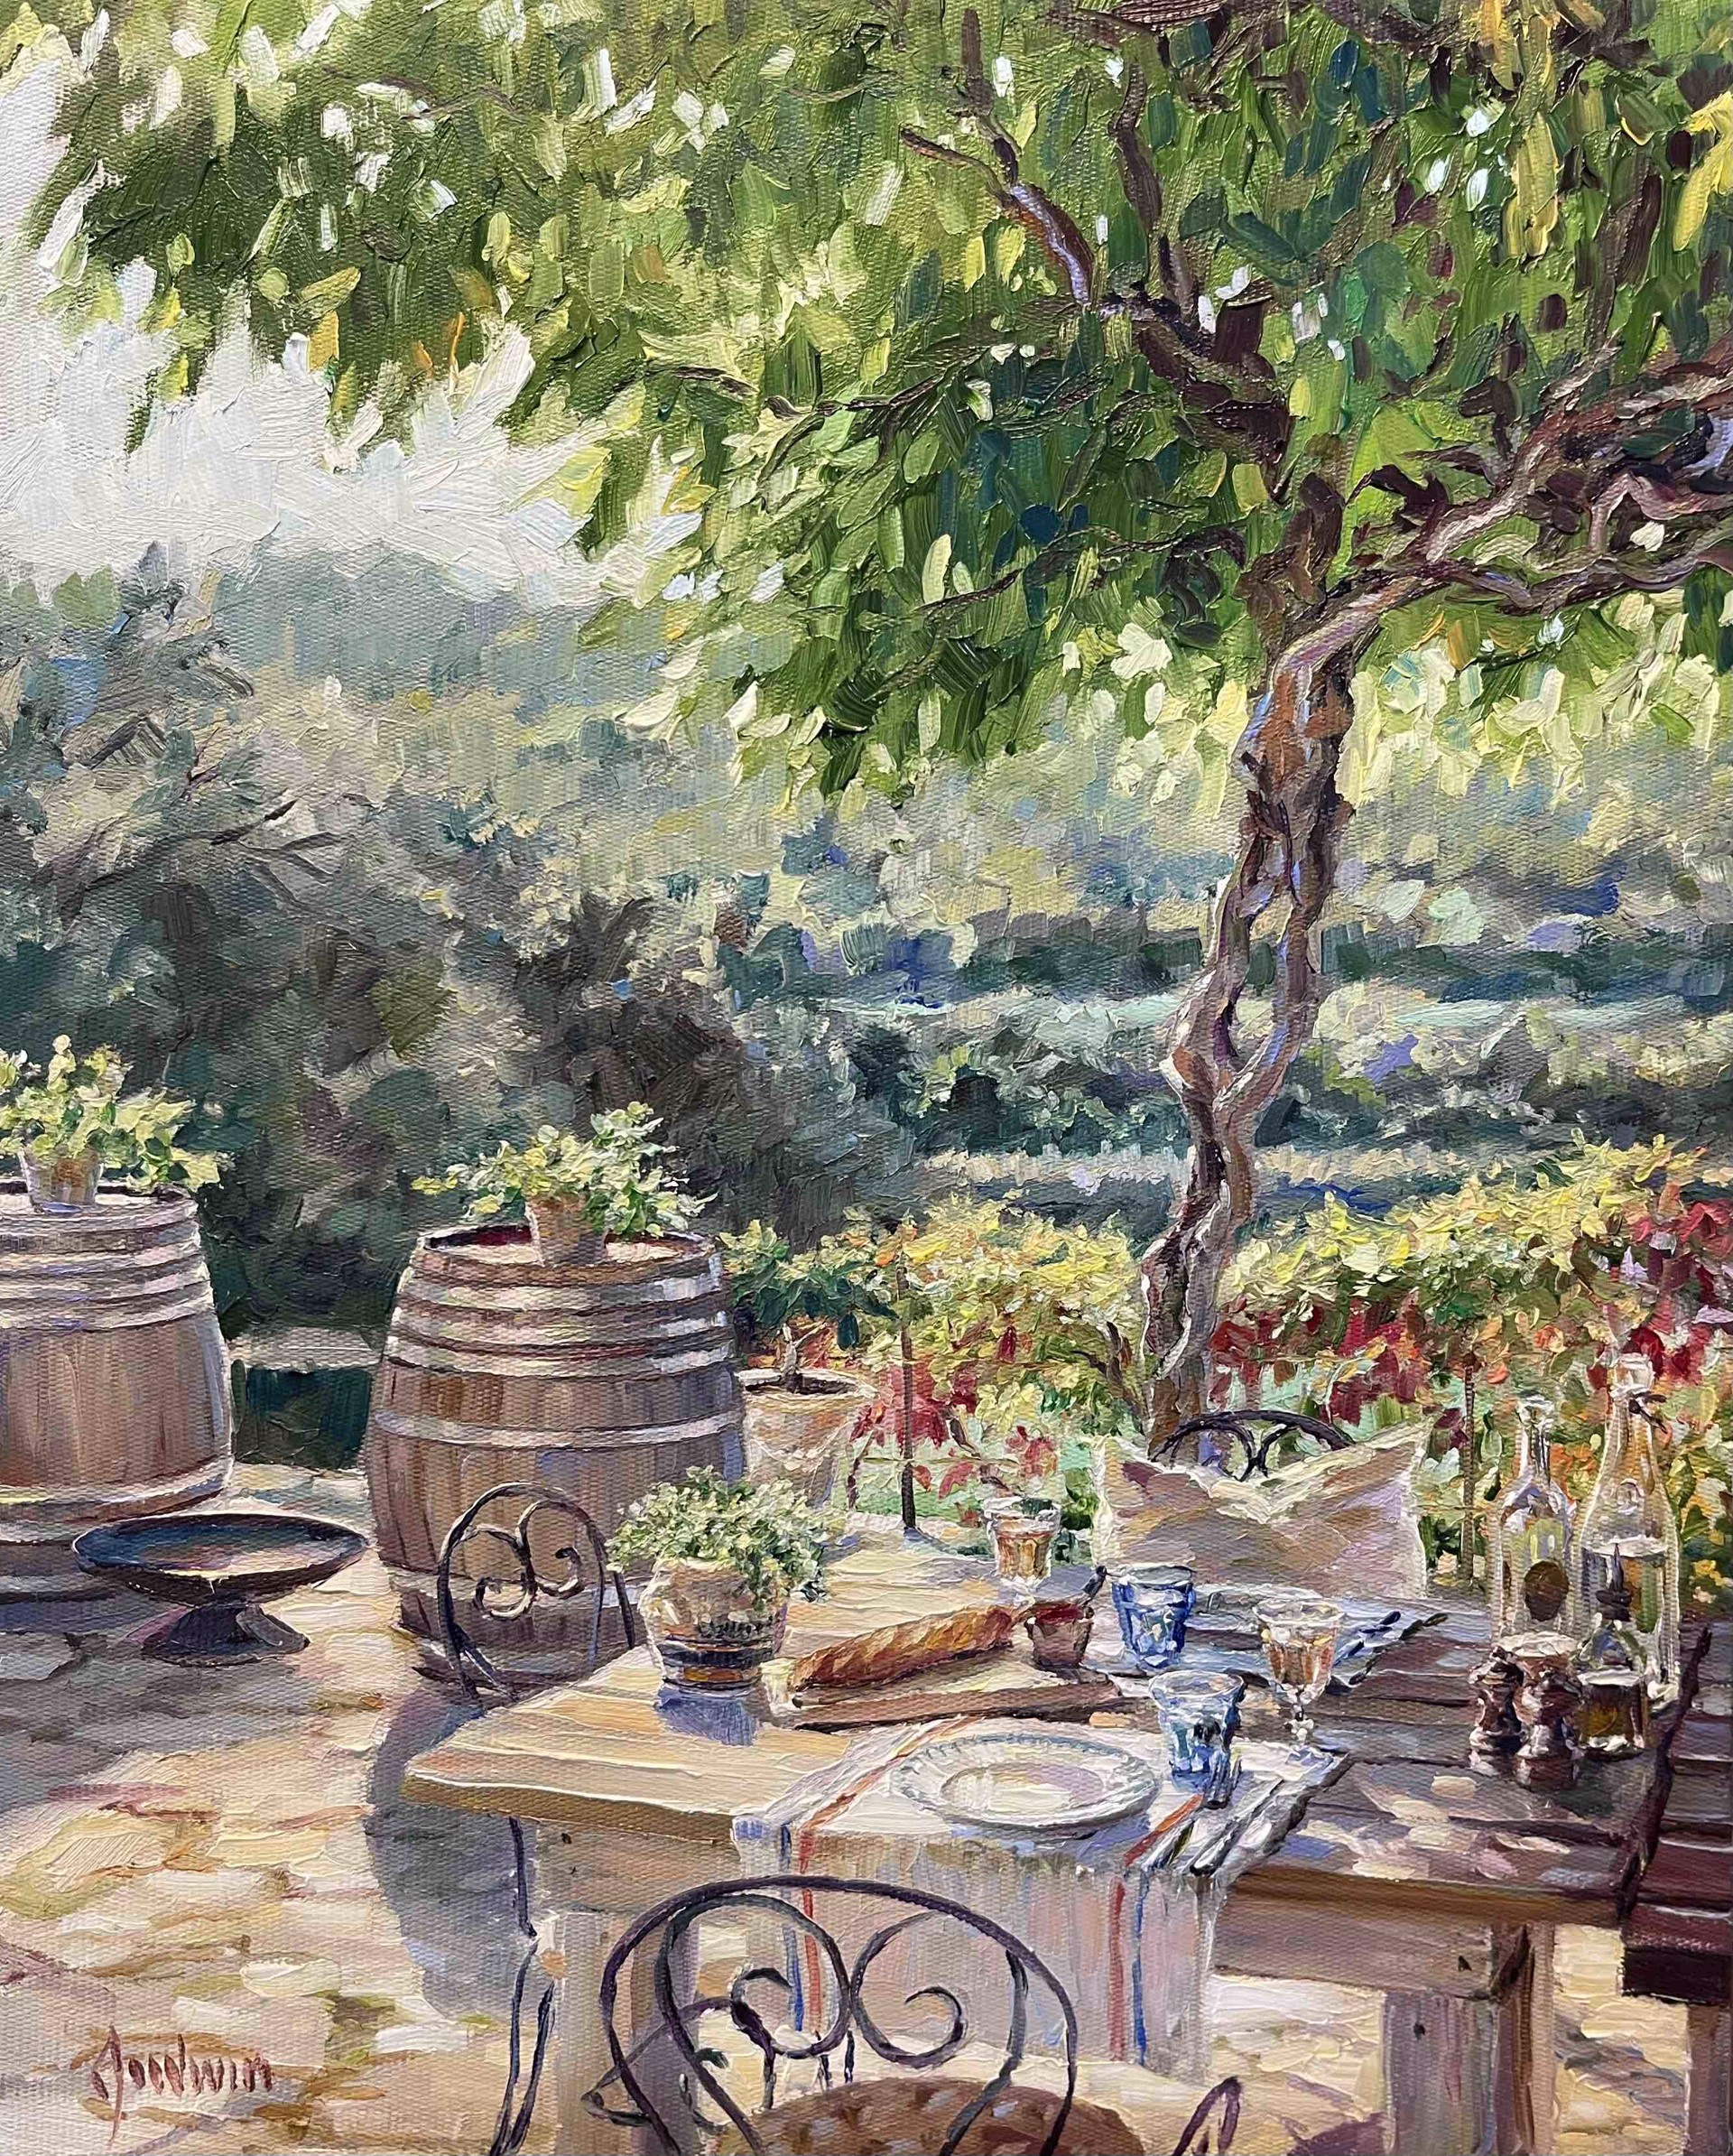 Vineyard at Les Oliver's by Lindsay Goodwin